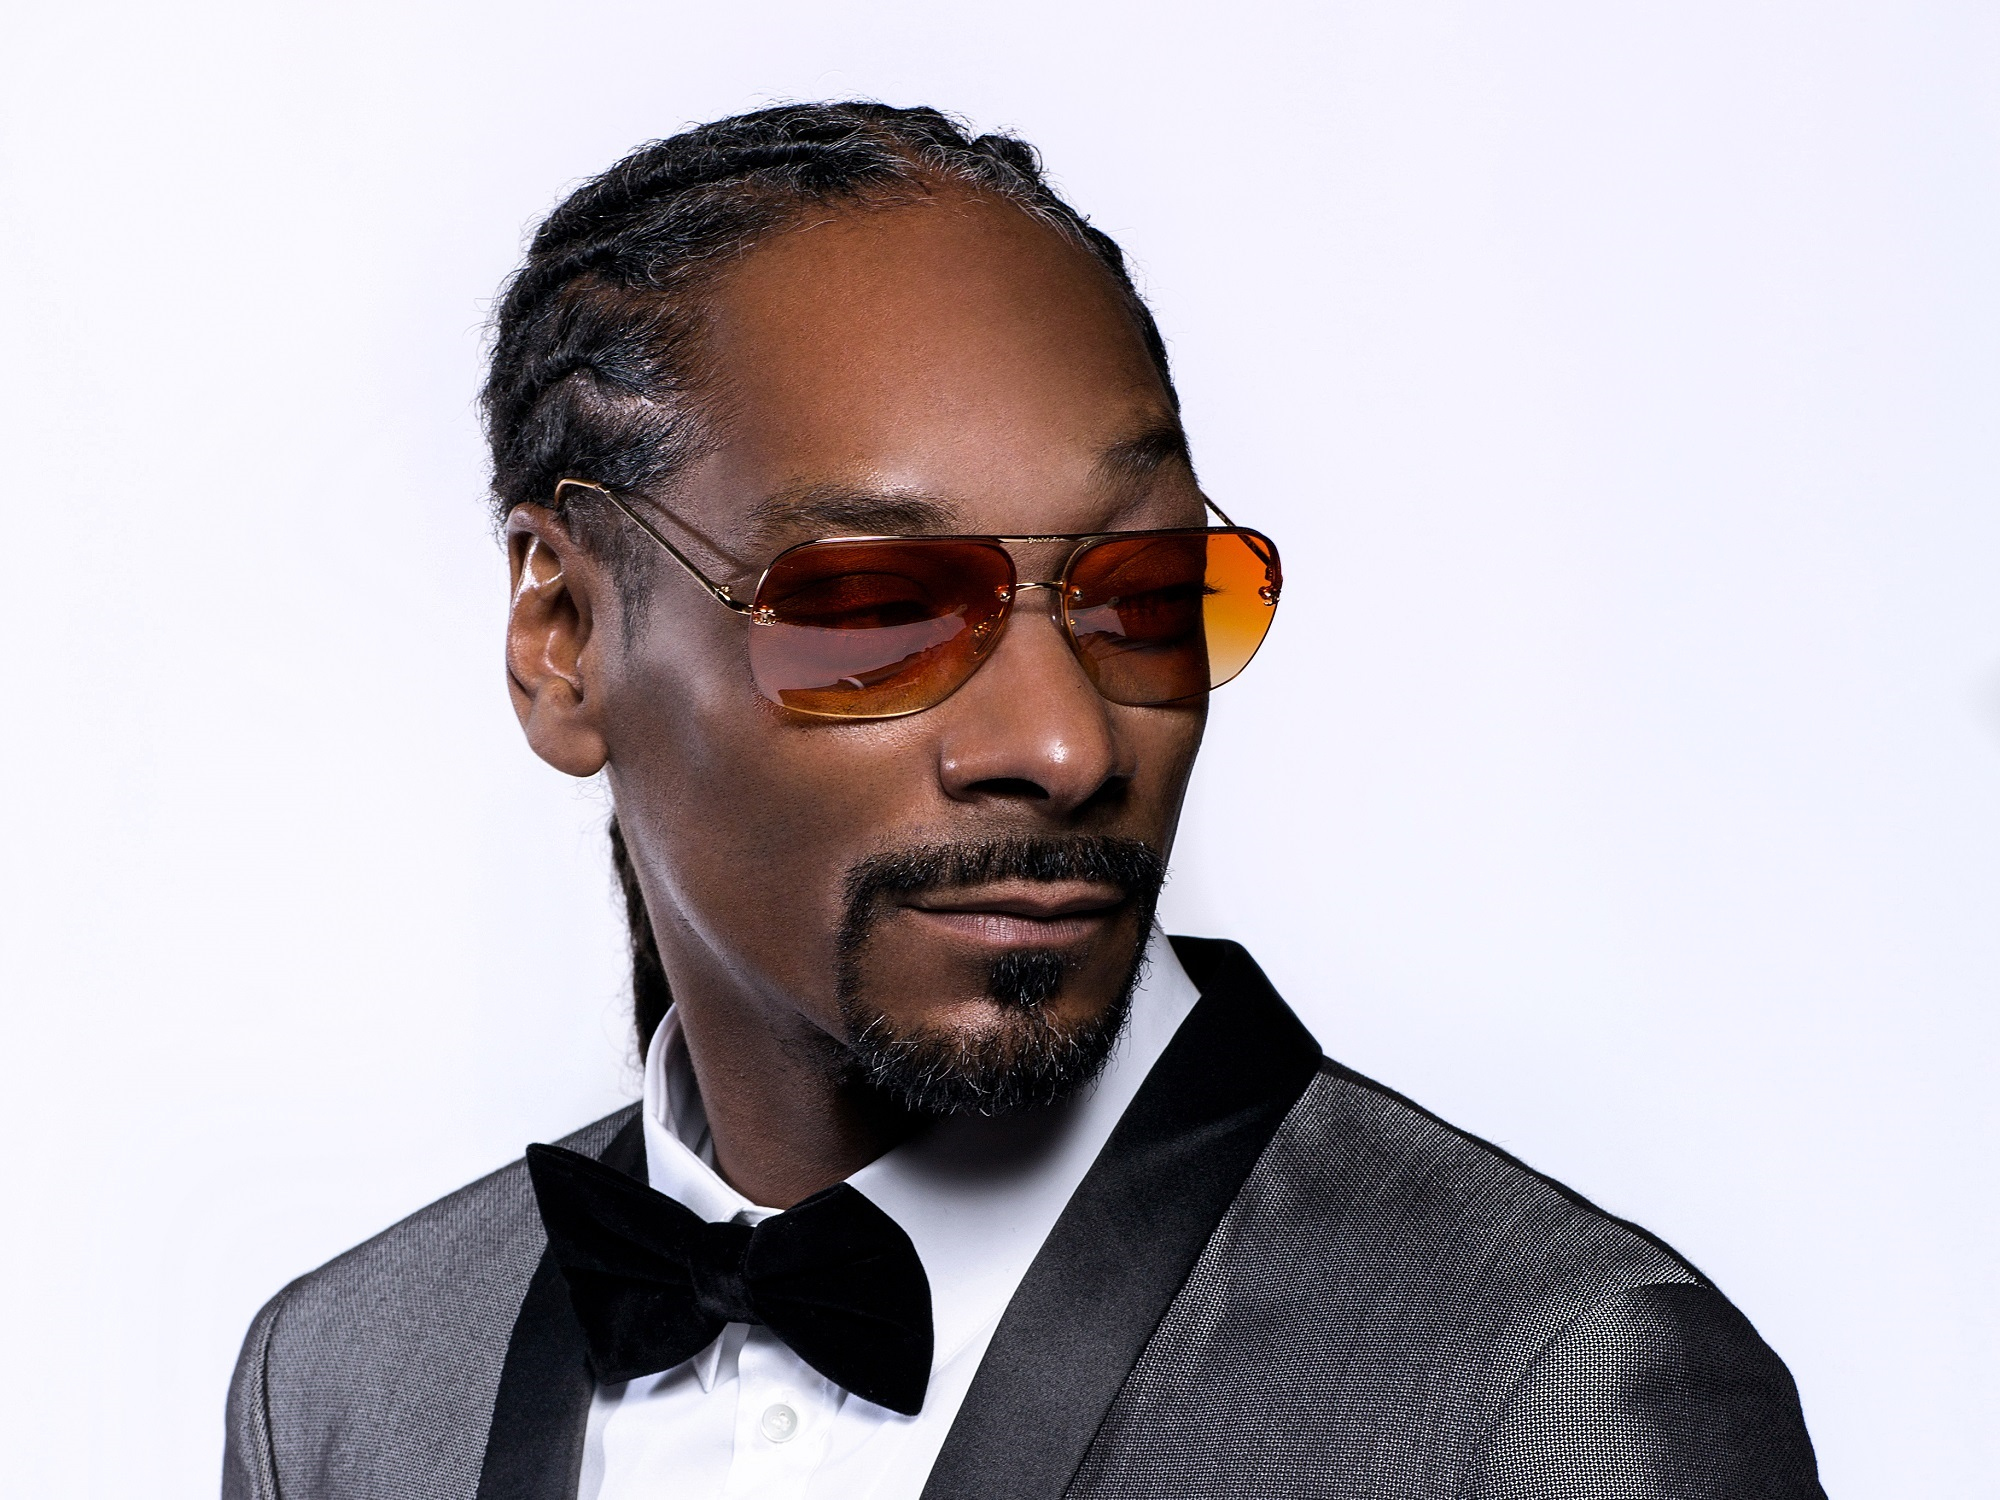 Snoop Dogg On Feminism In Hip Hop ” Let’s Have Some Imagination” 99.